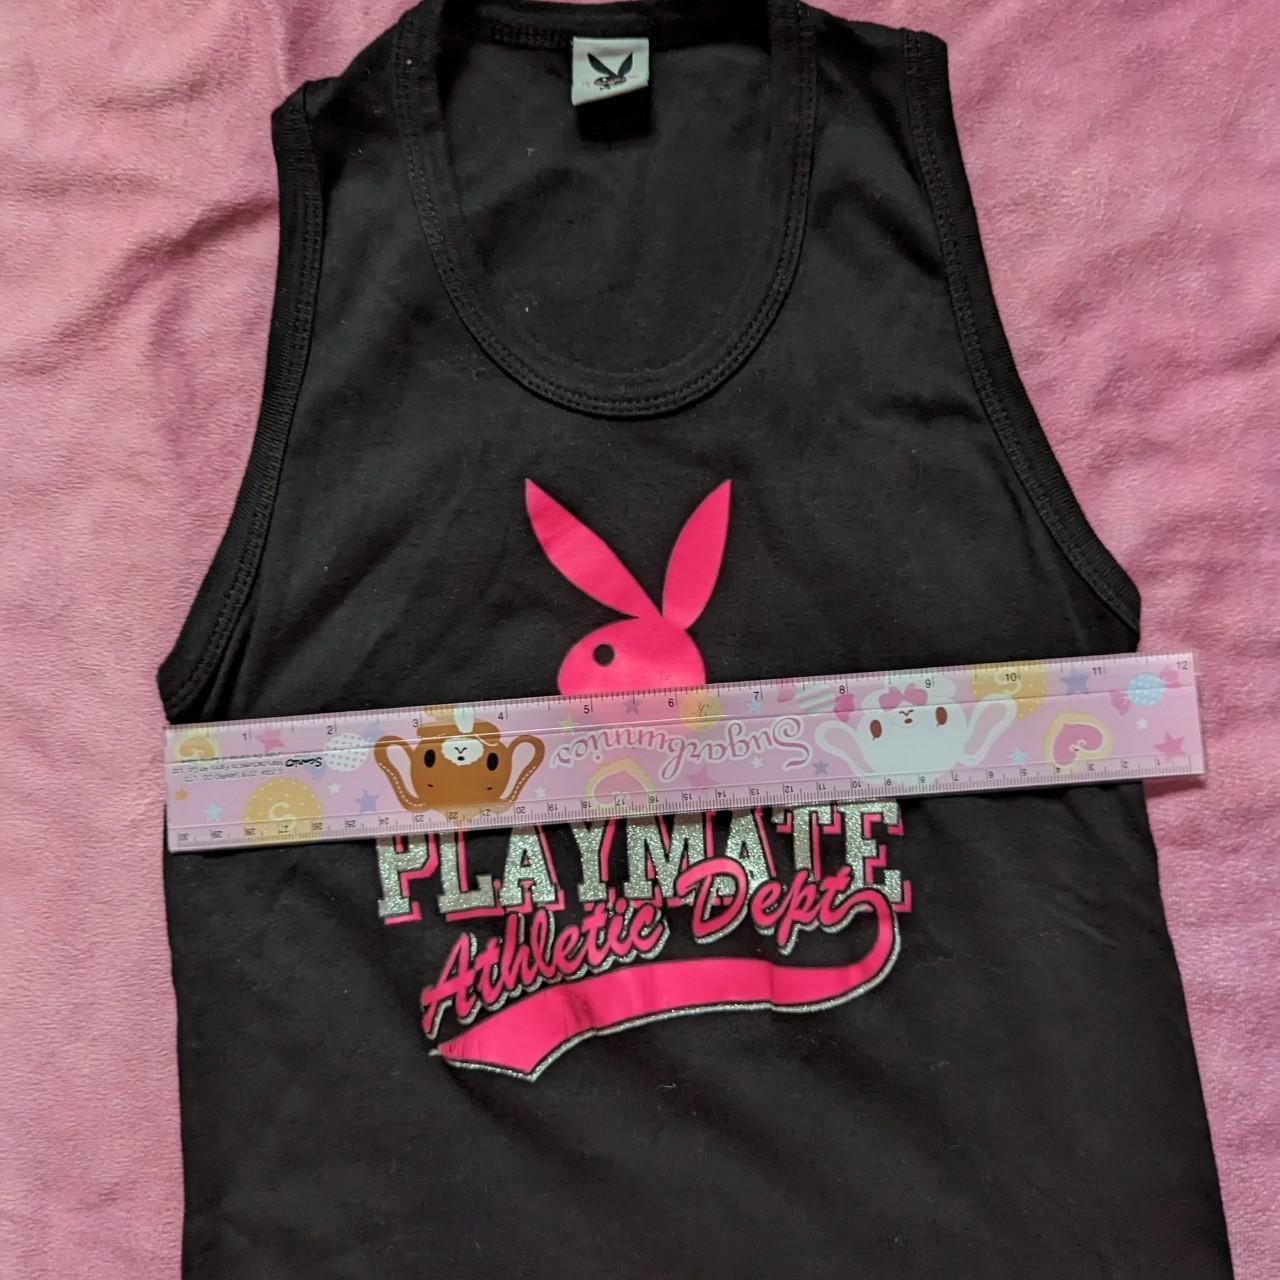 Playboy tank top estimated xs clothes may have a... - Depop